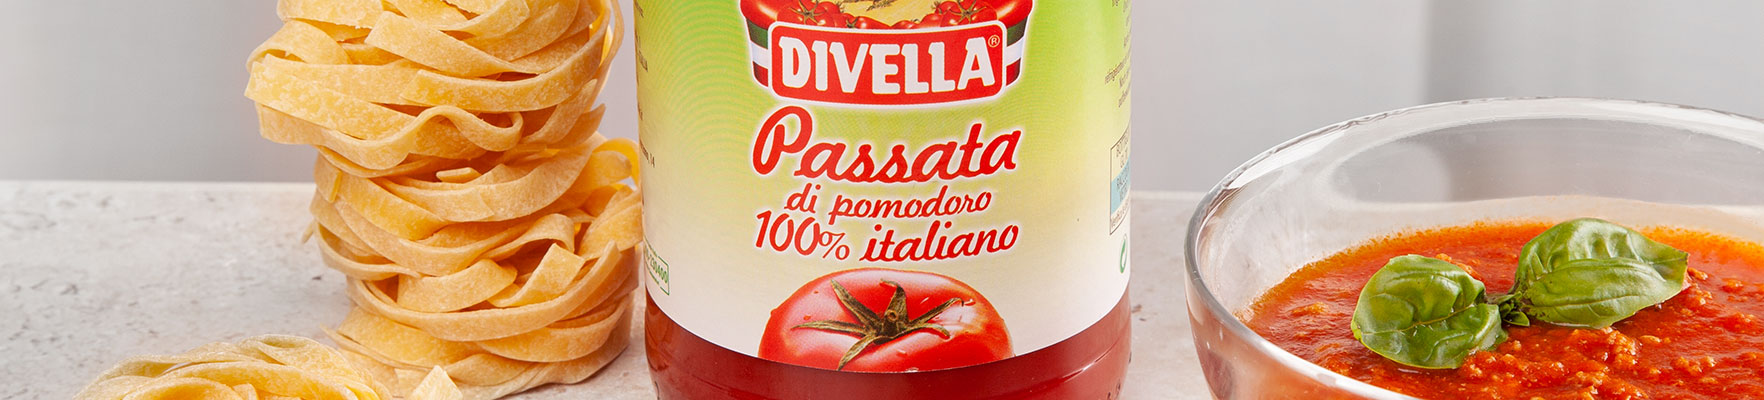 Tomato Products and Sauces